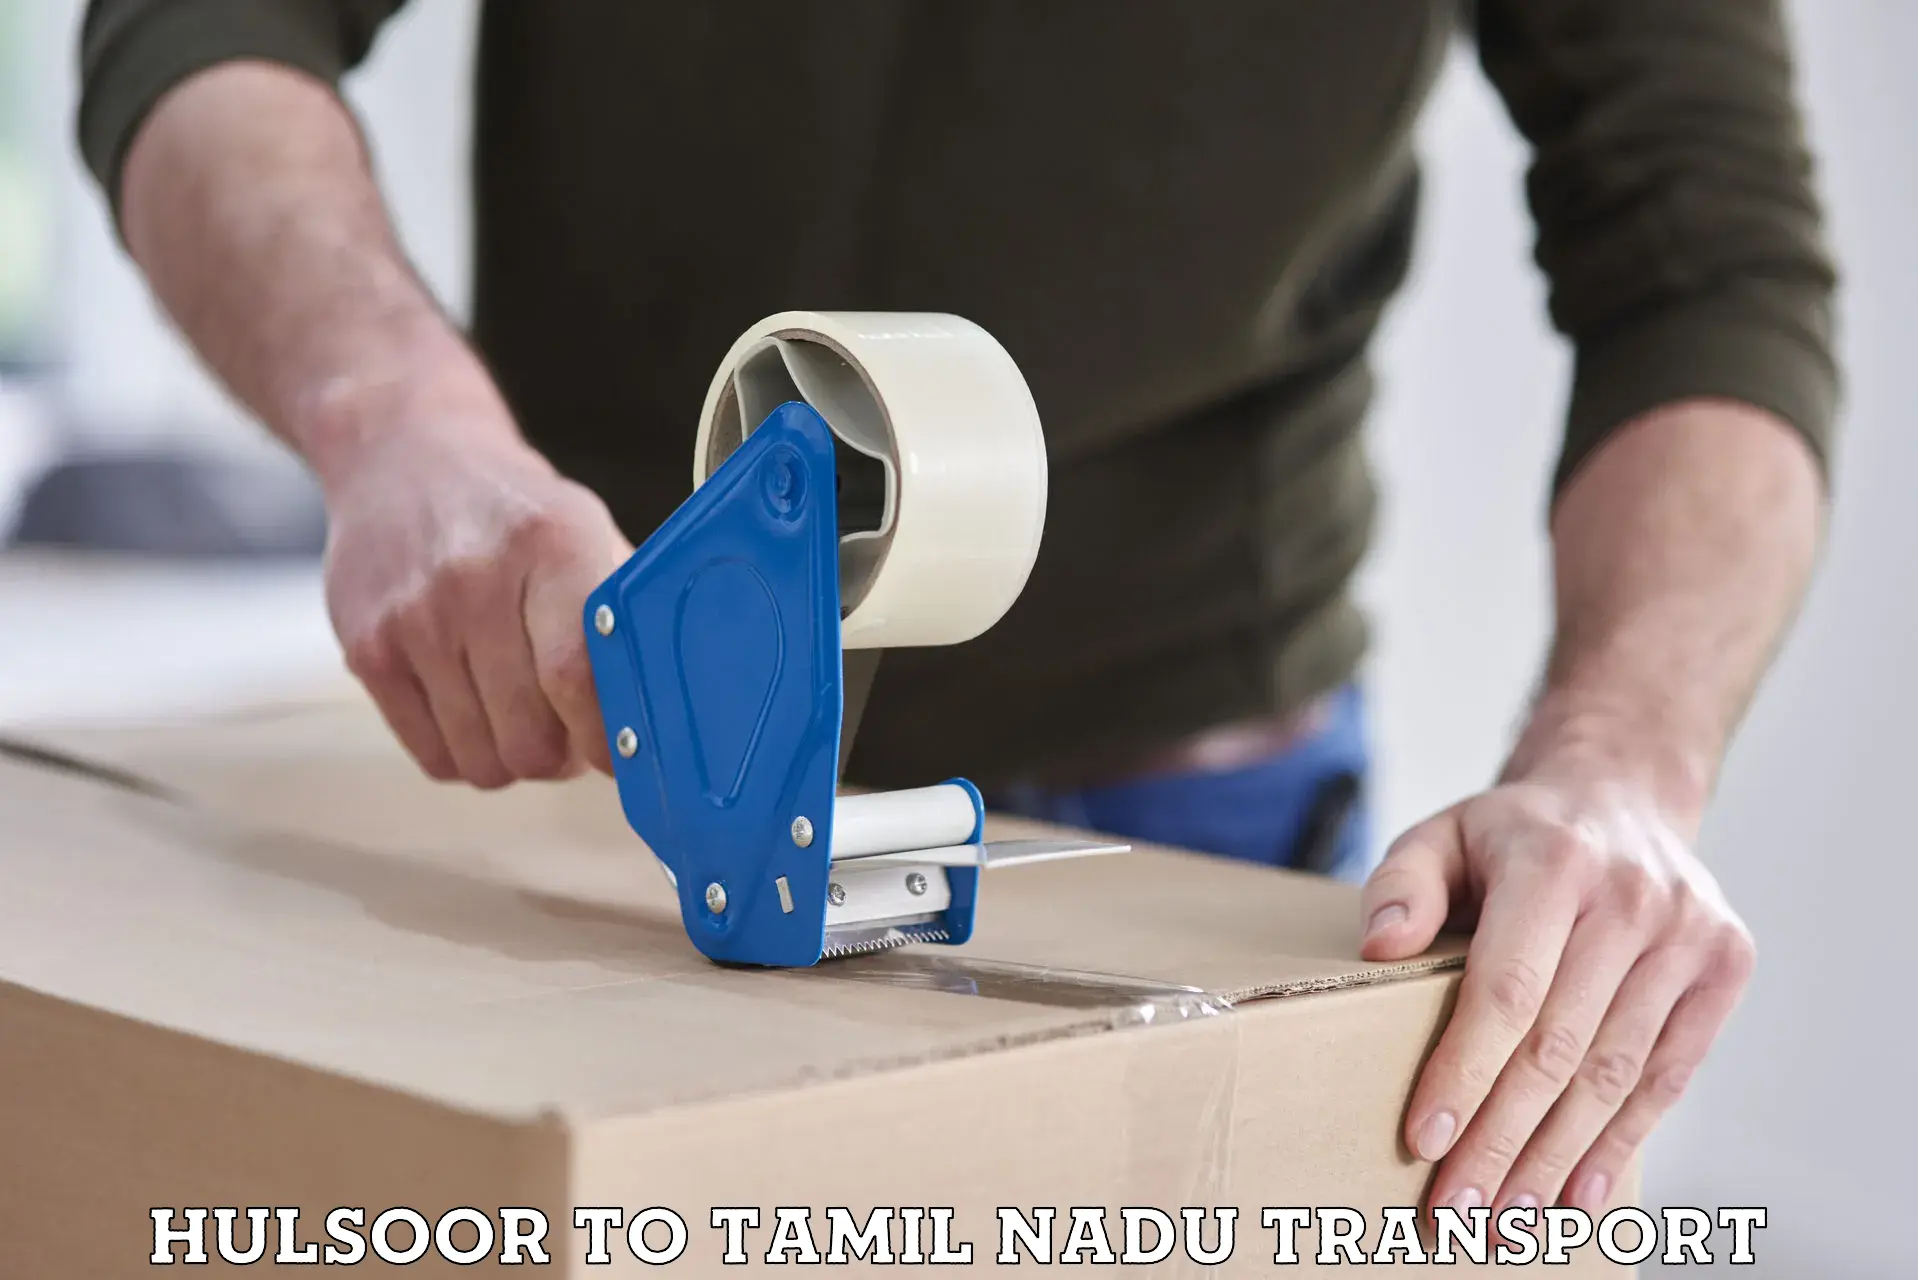 Daily transport service in Hulsoor to Tamil Nadu